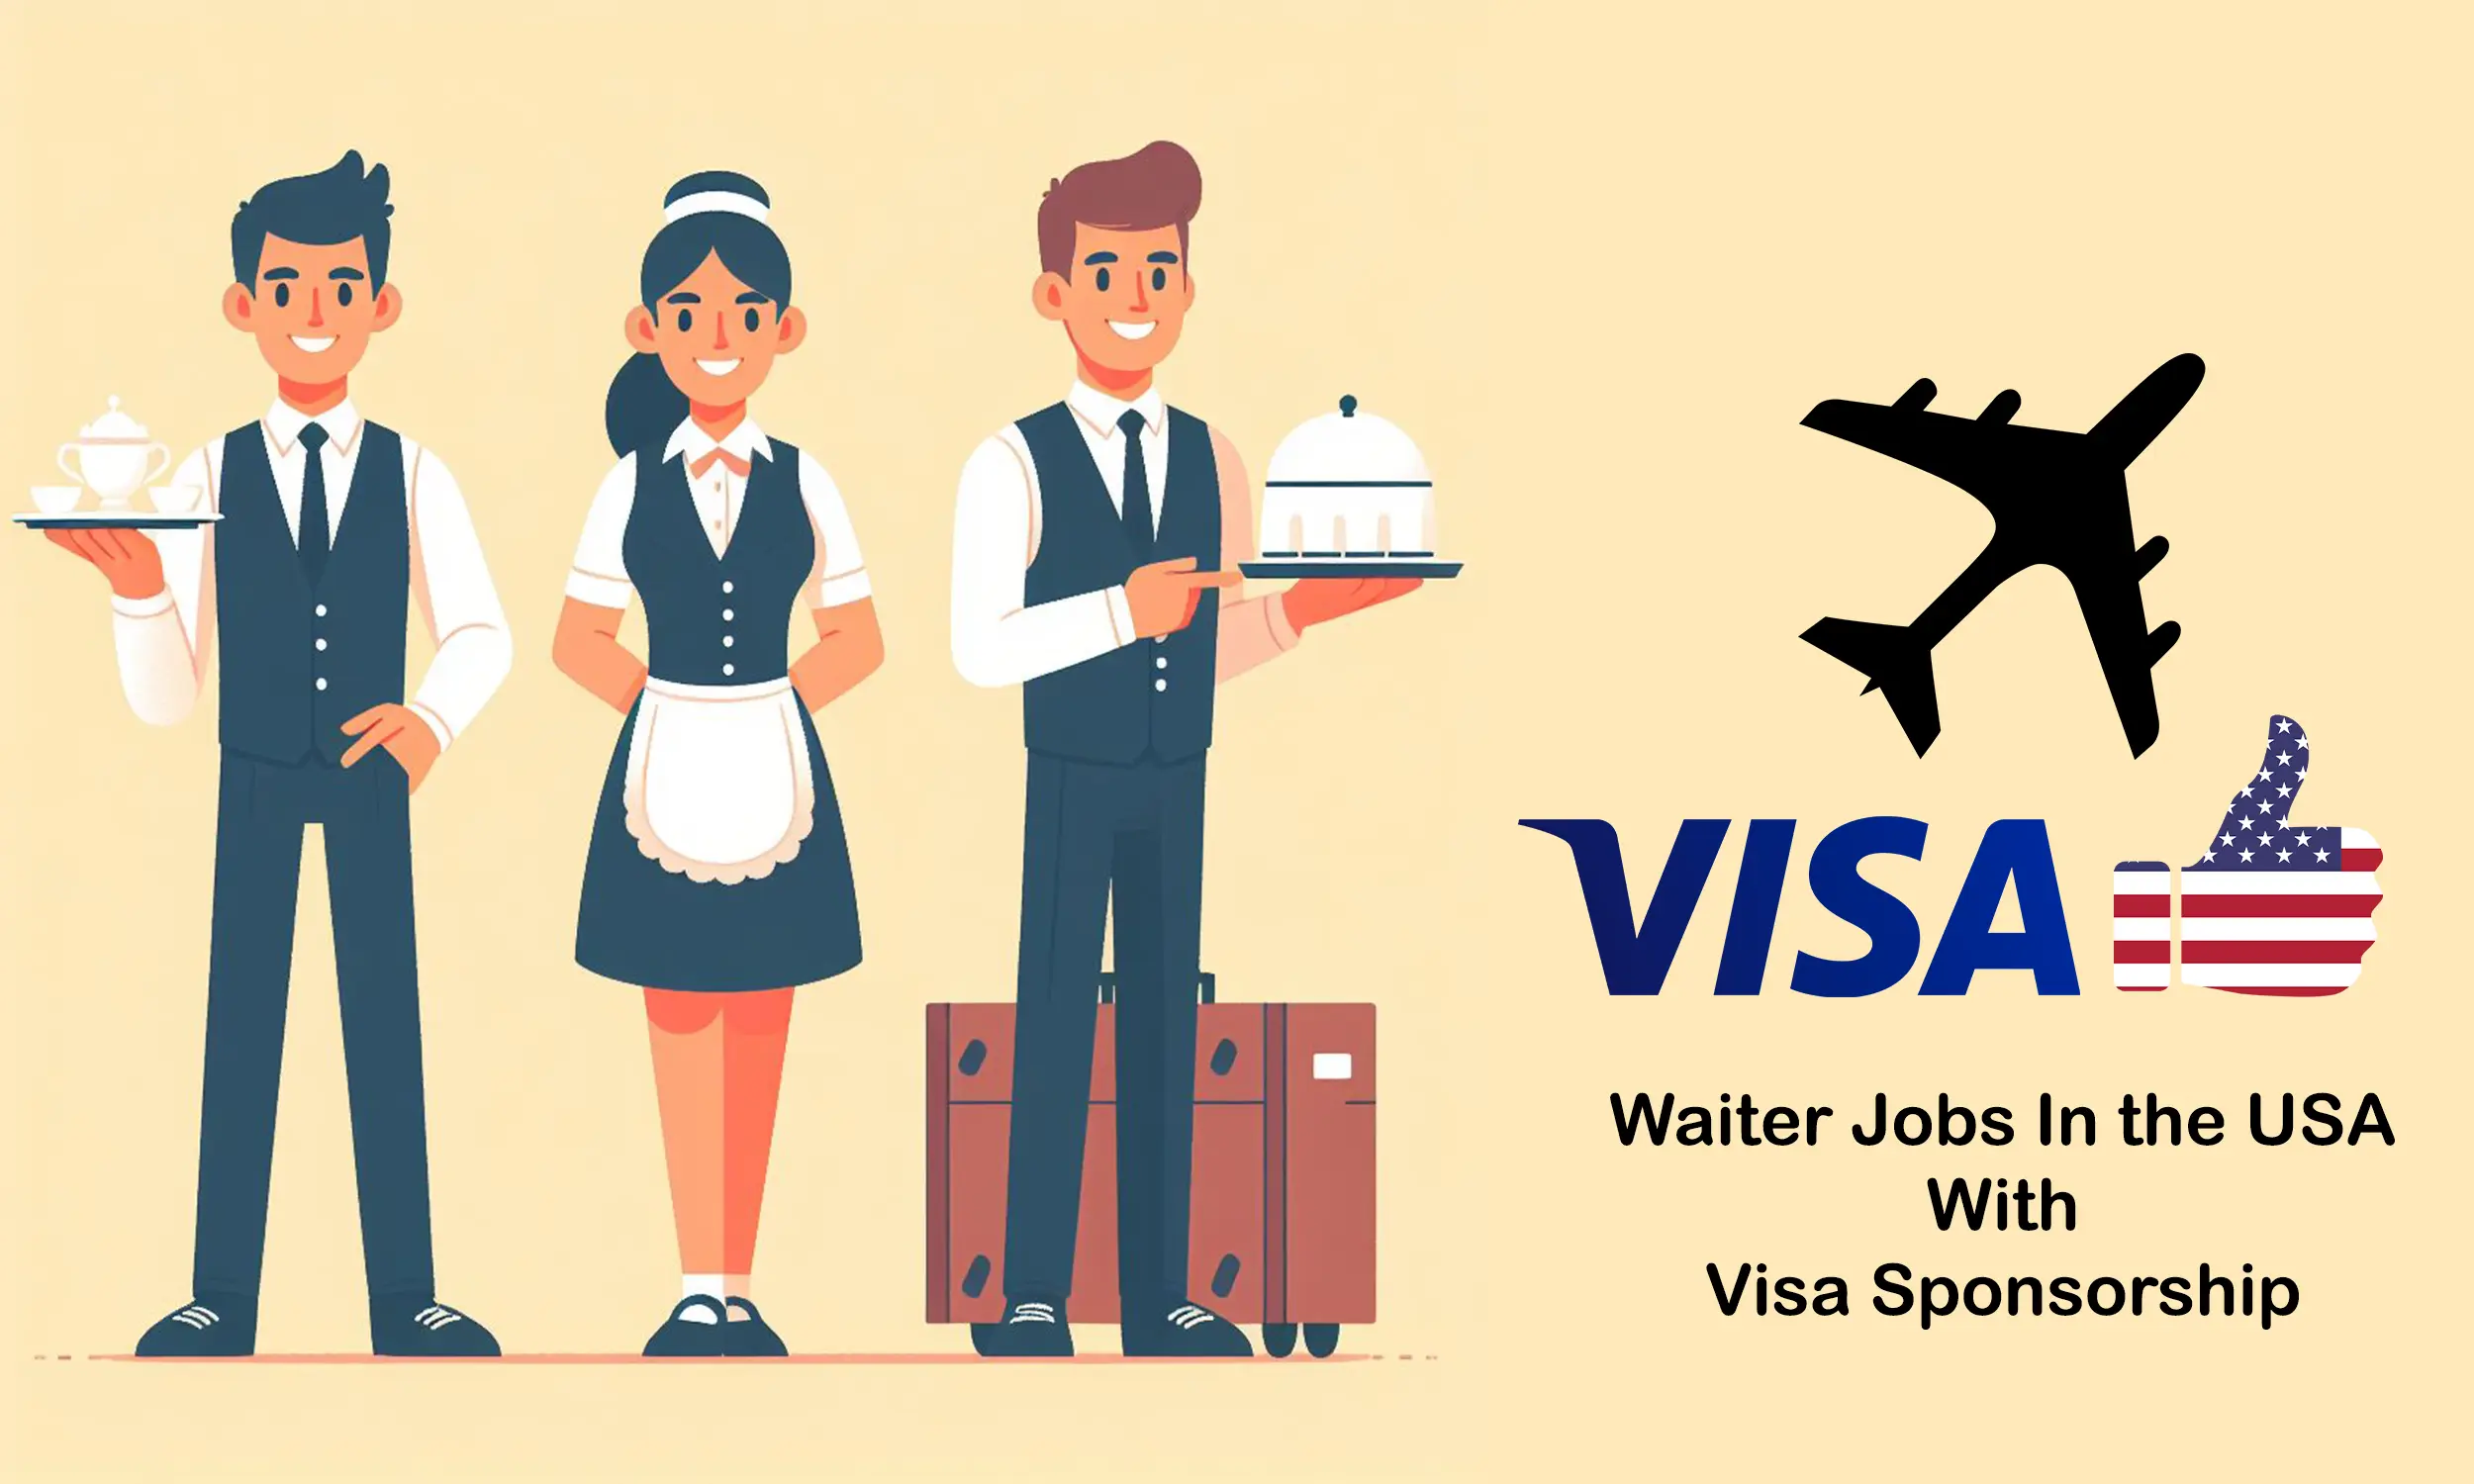 Waiter Jobs In the USA With Visa Sponsorship